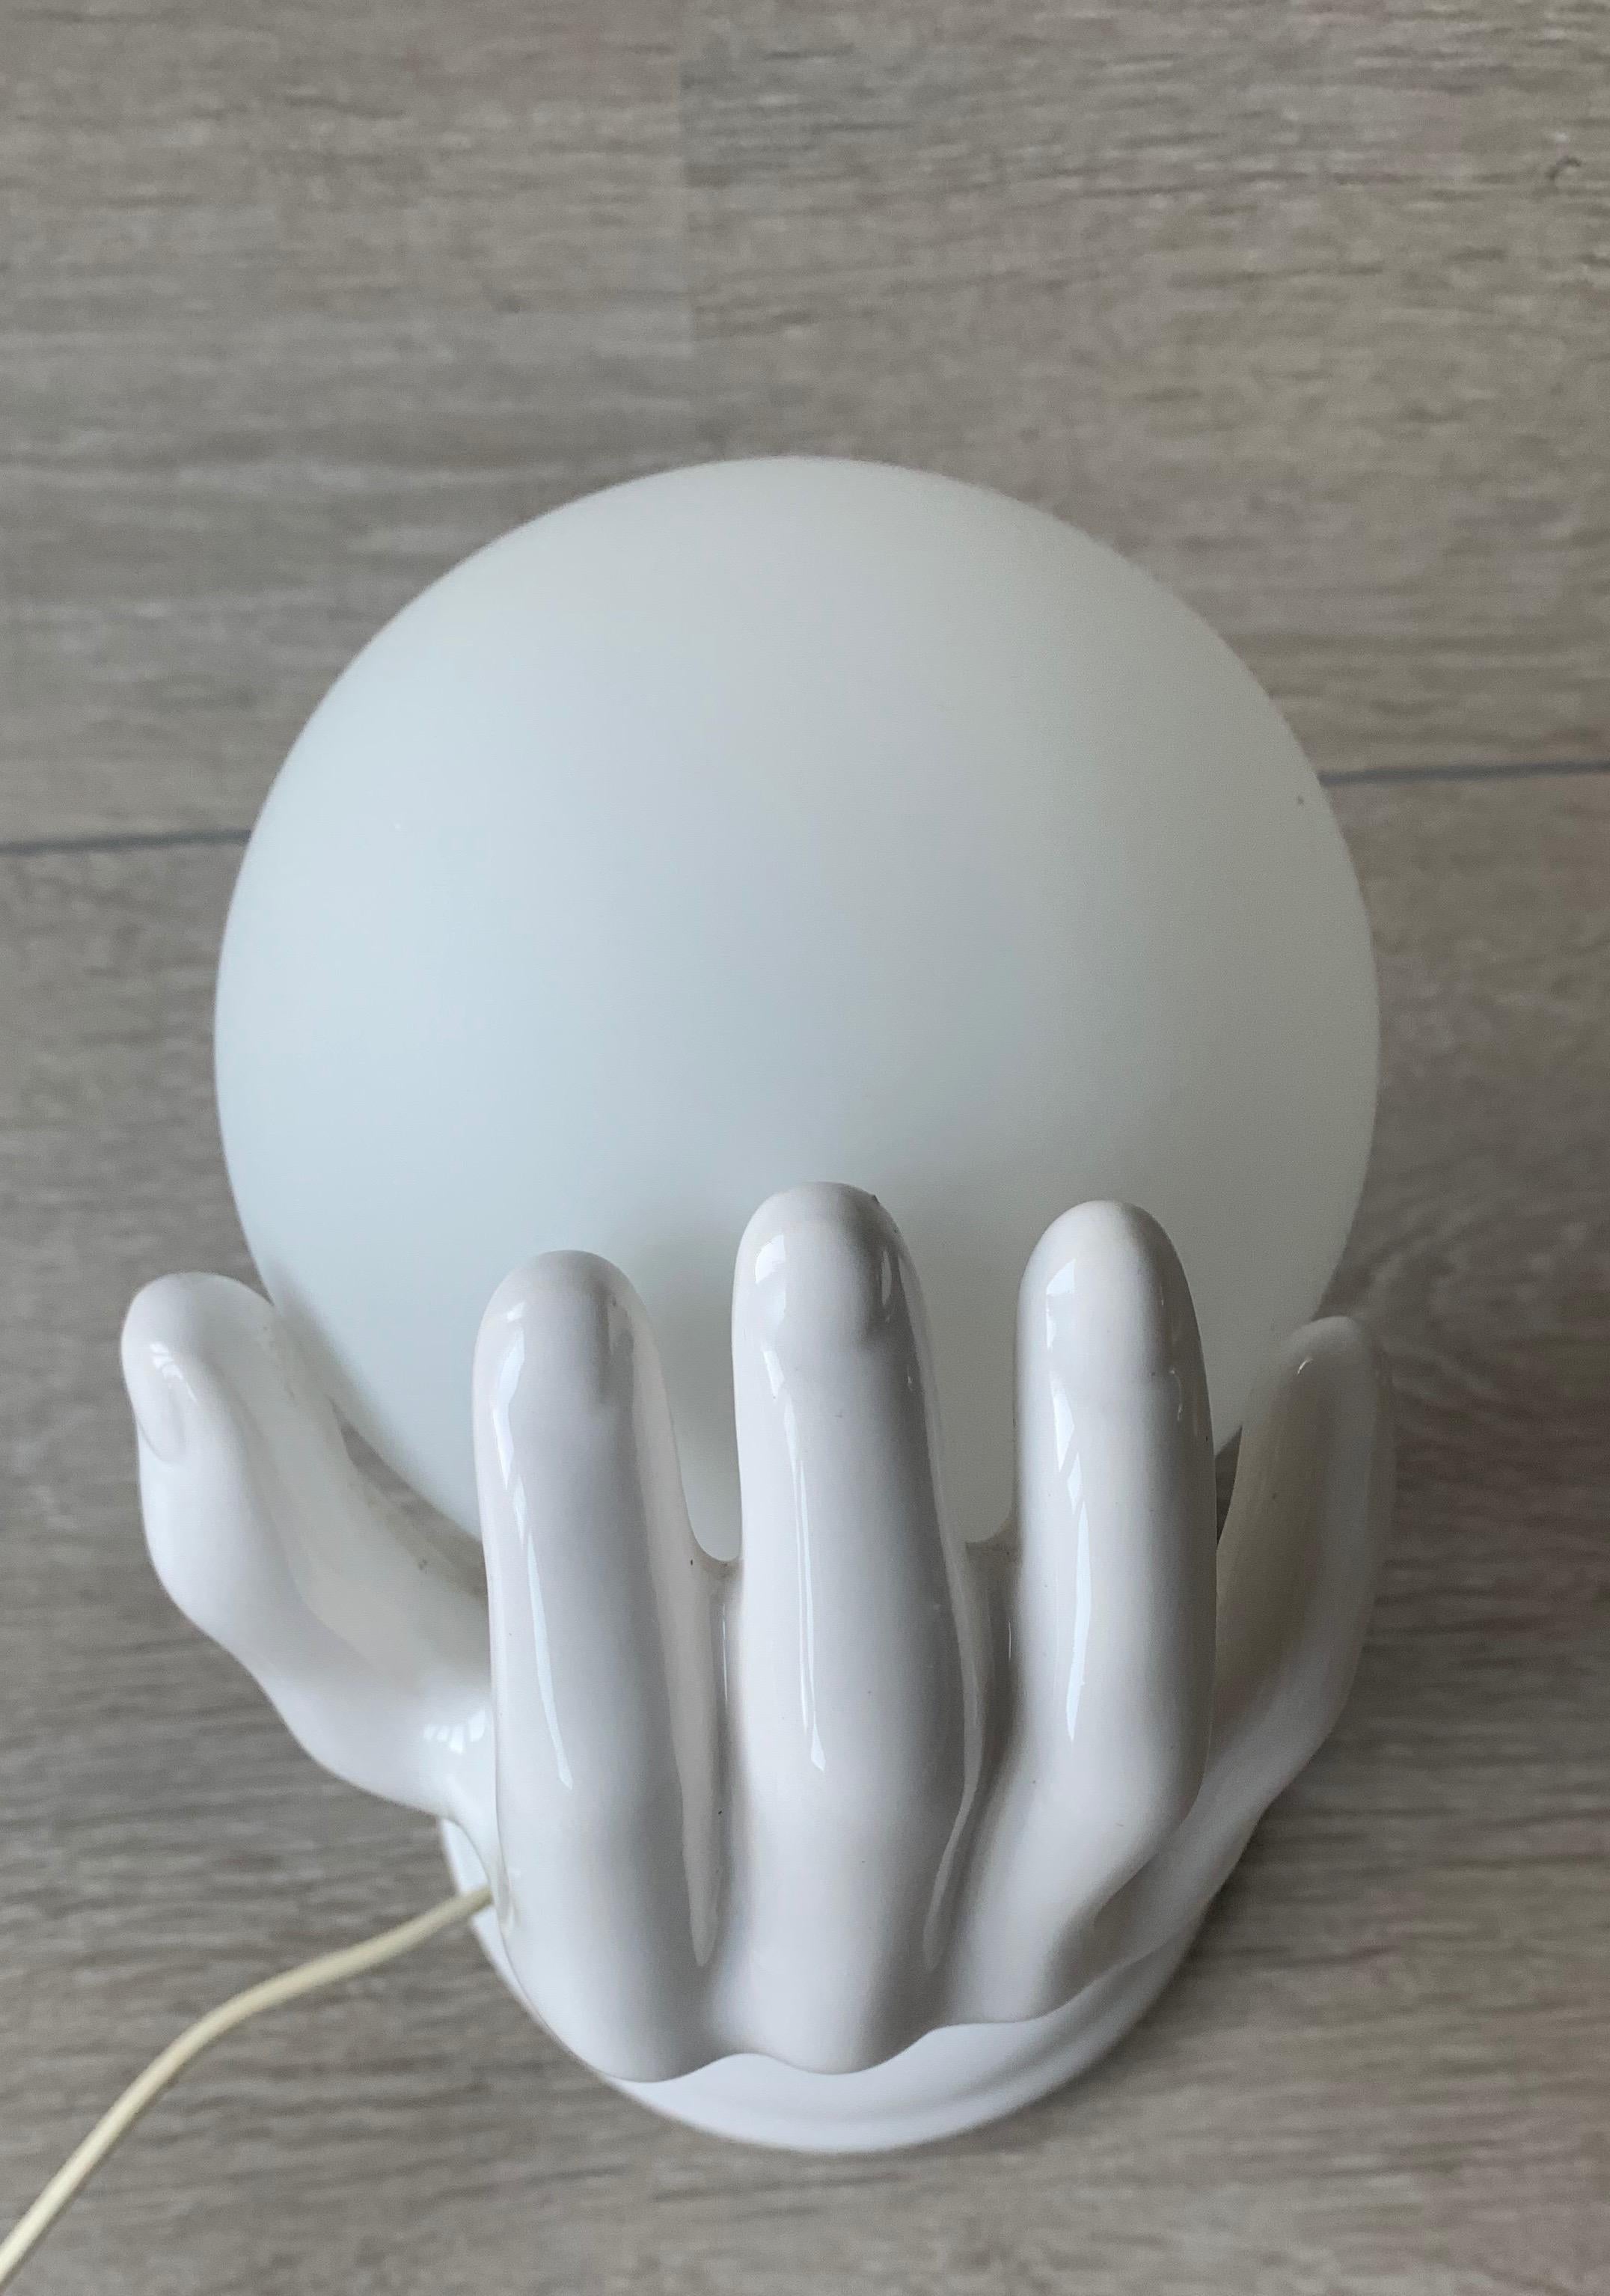 1970s Glazed White Ceramic Hand Holding a Glass Globe Wall Sconce or Wall Light 2